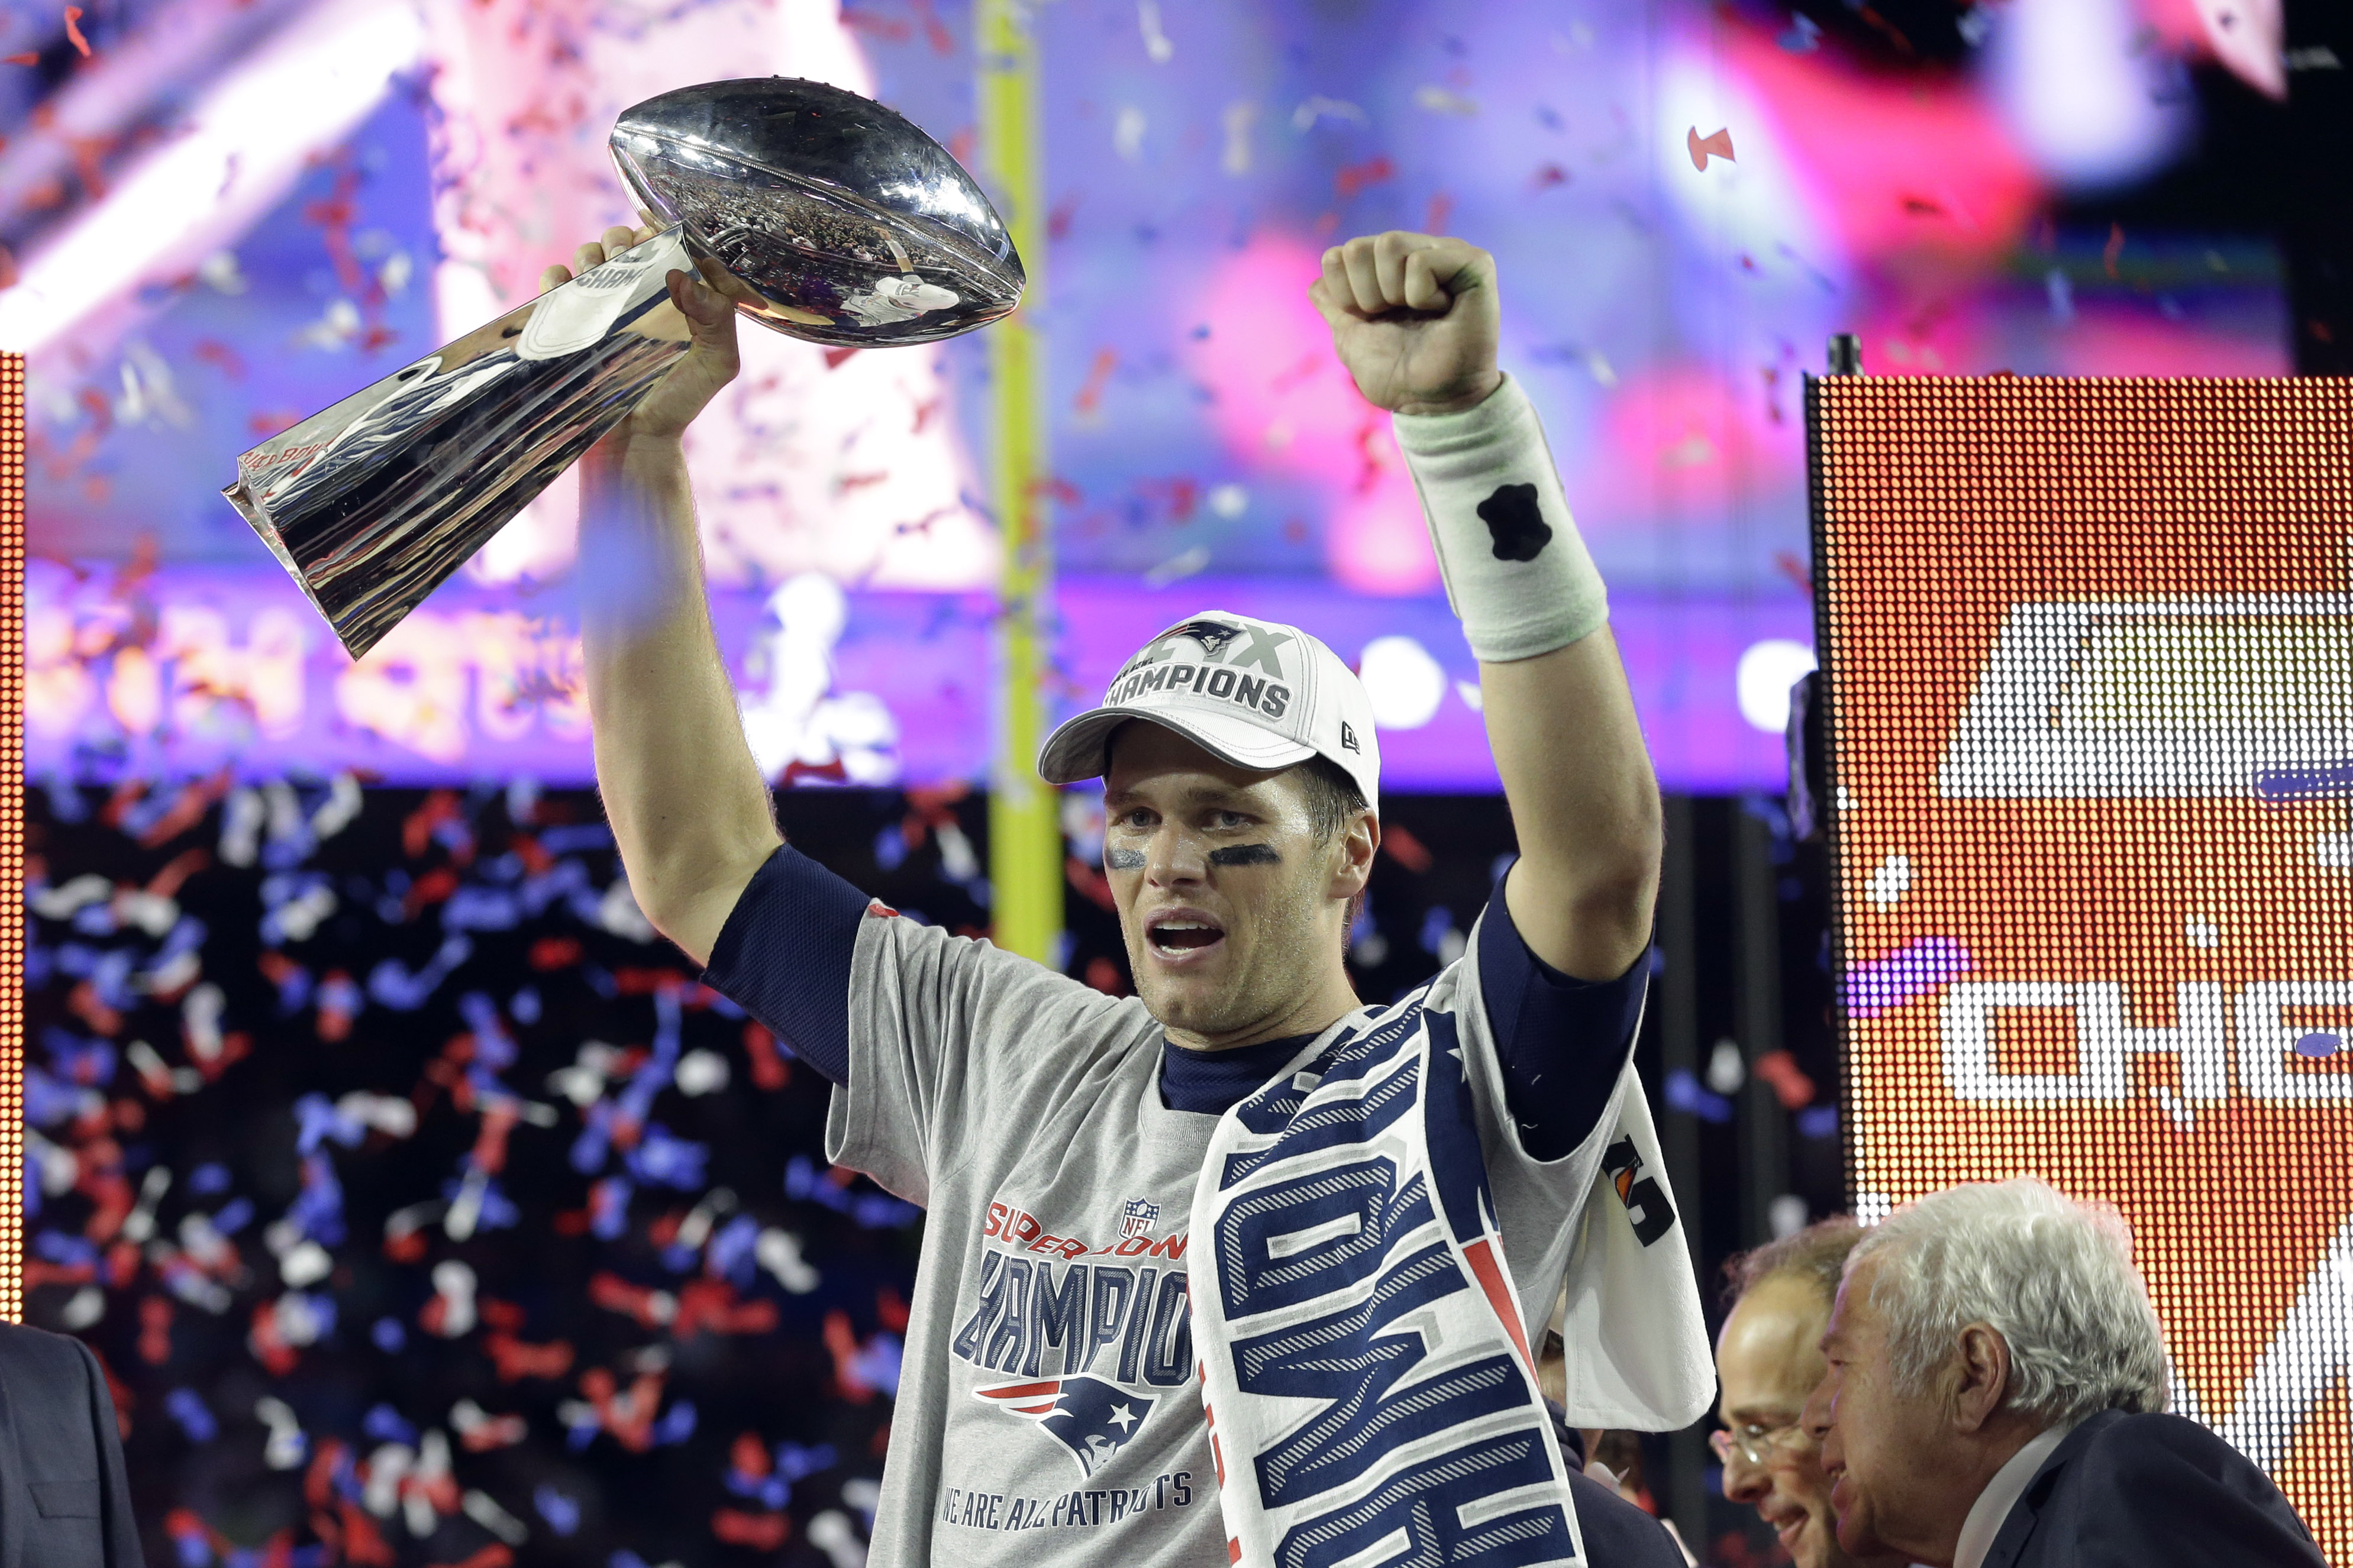 Super Bowl 2015 Patriots overtake Seahawks to reign as Super Bowl